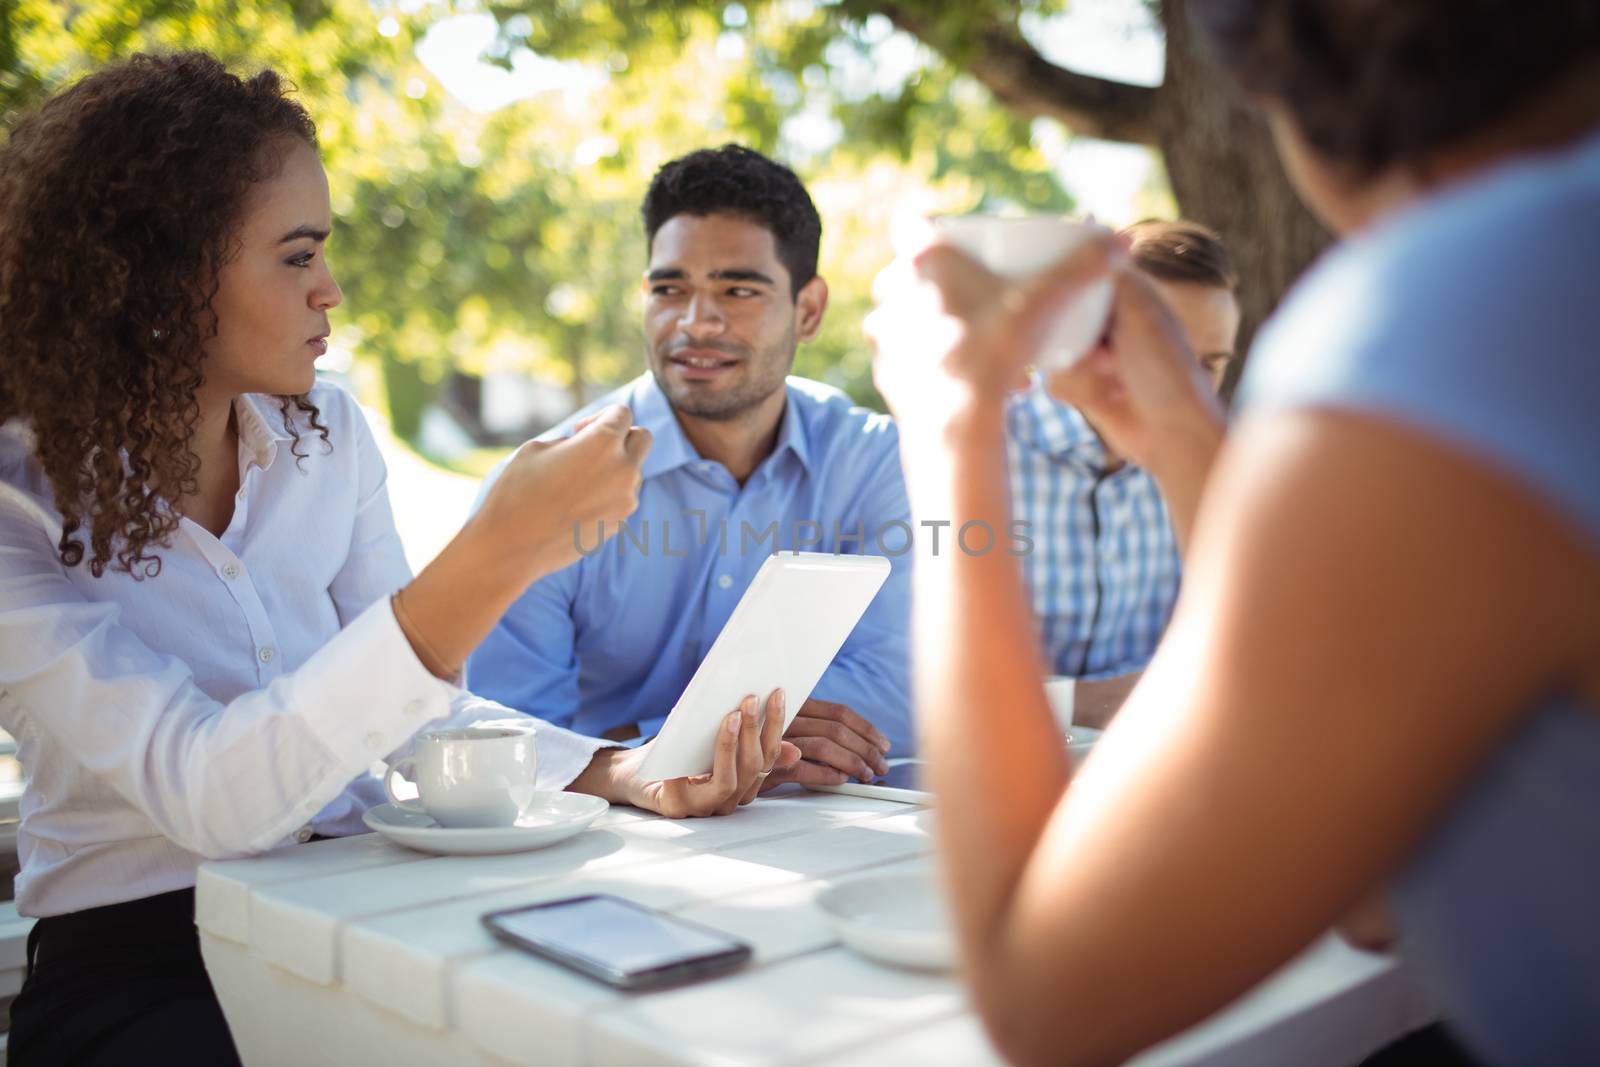 Group of friends interacting with each other in outdoors restaurant